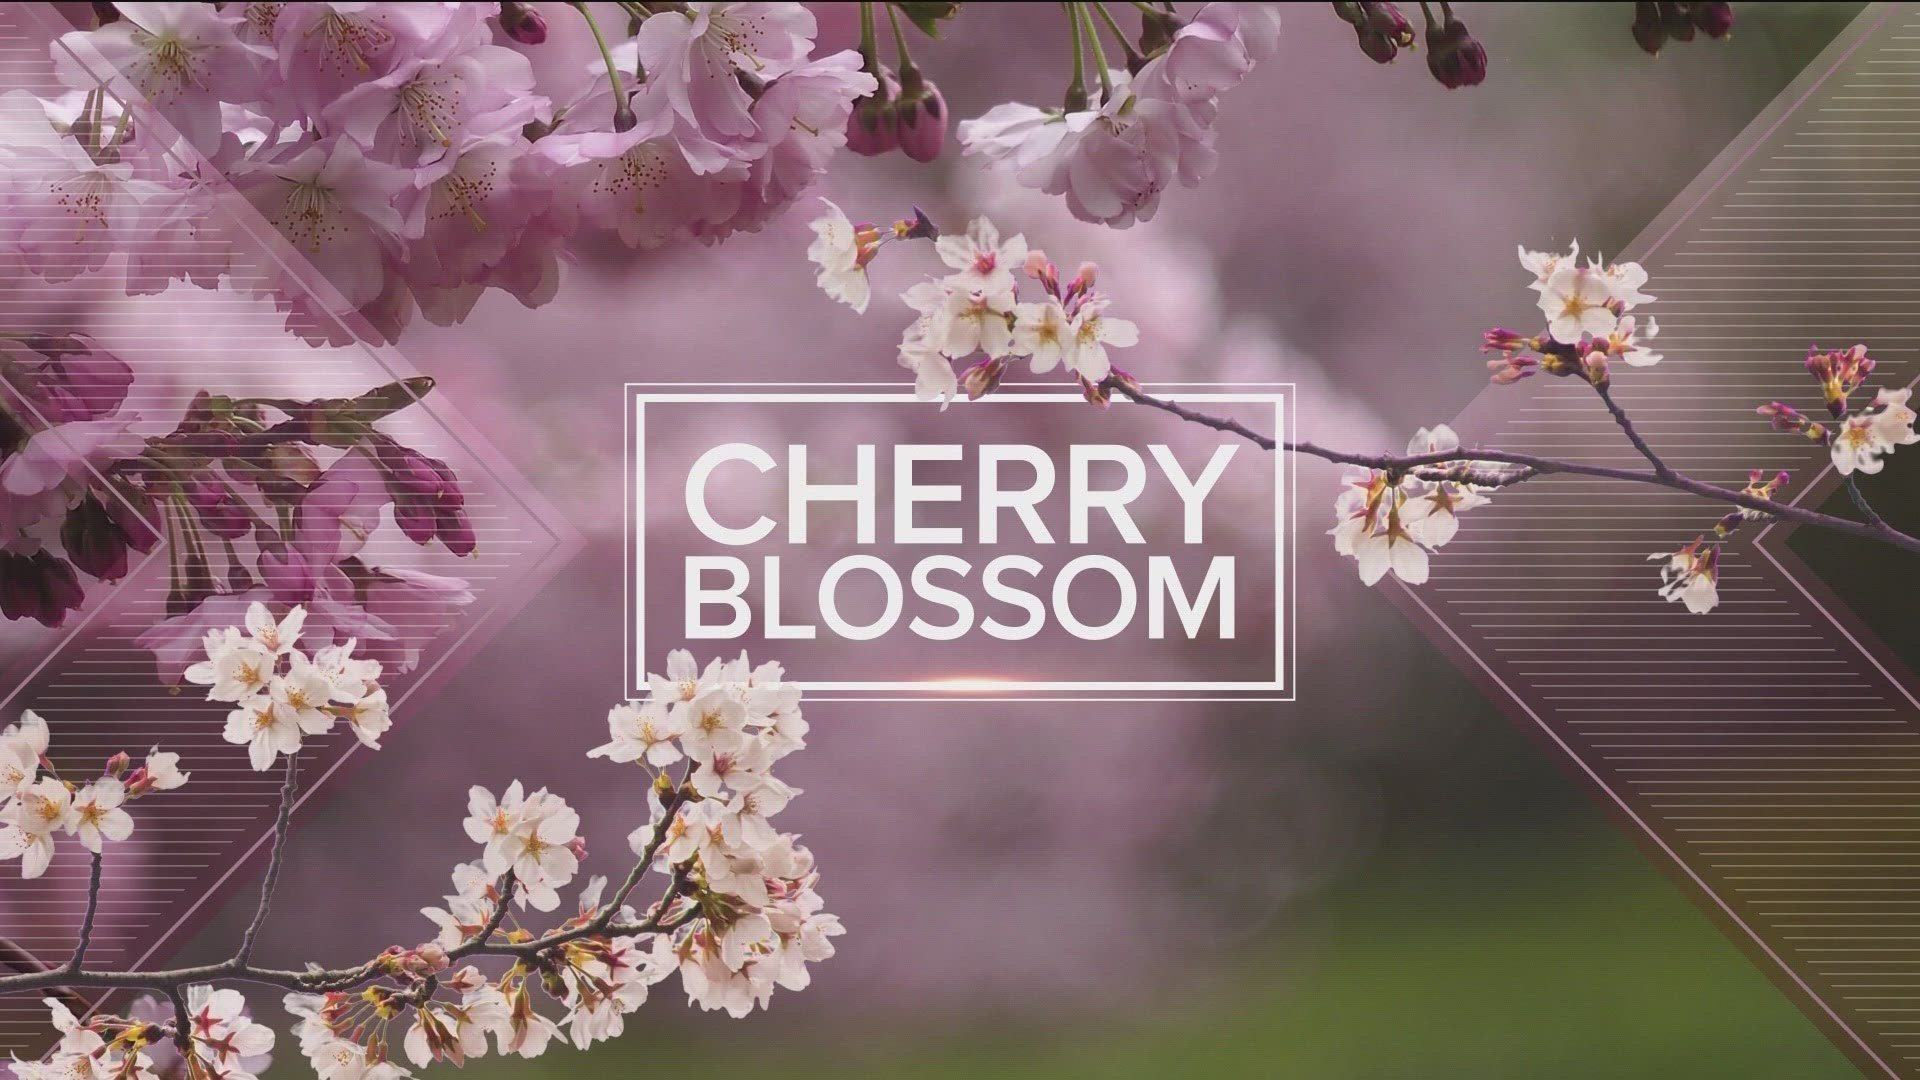 You can enjoy free treats and live music on Third Street every week-day during Cherry Blossom from 11:30 a.m. - 1:00 p.m.